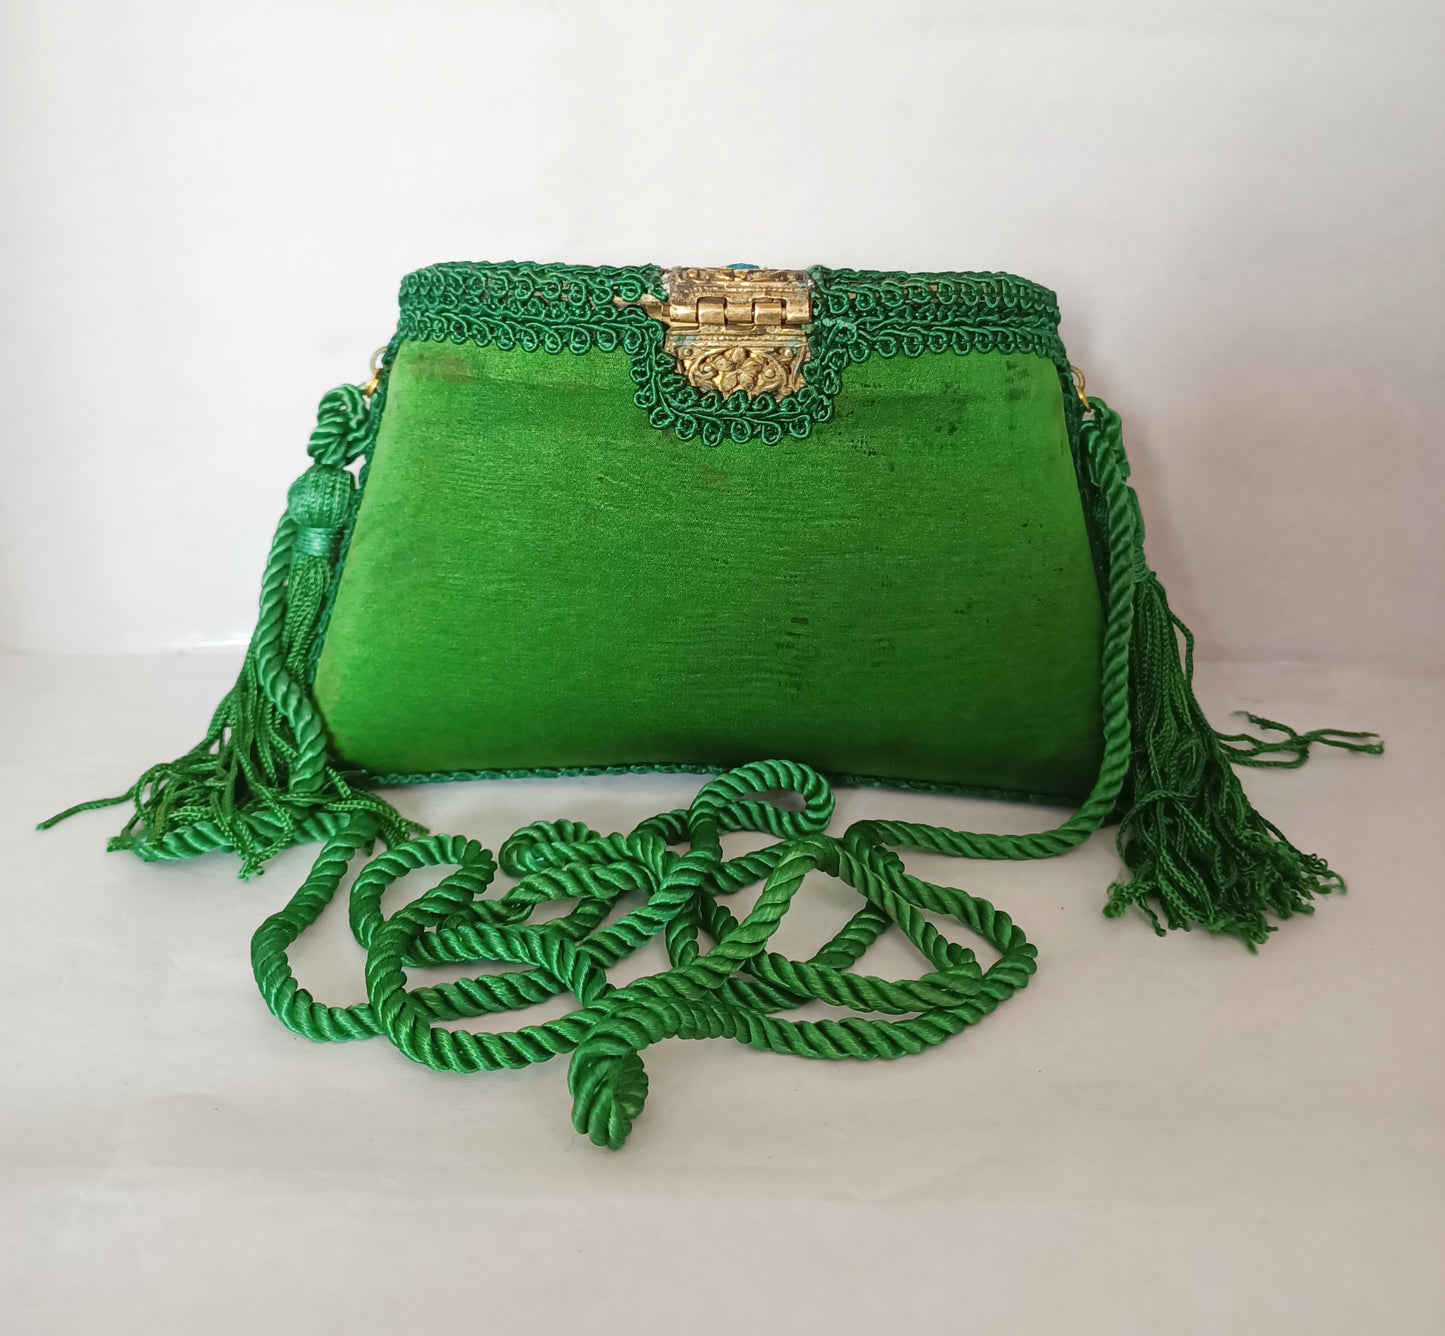 New Flower Embroidery Stone Purse Green Color